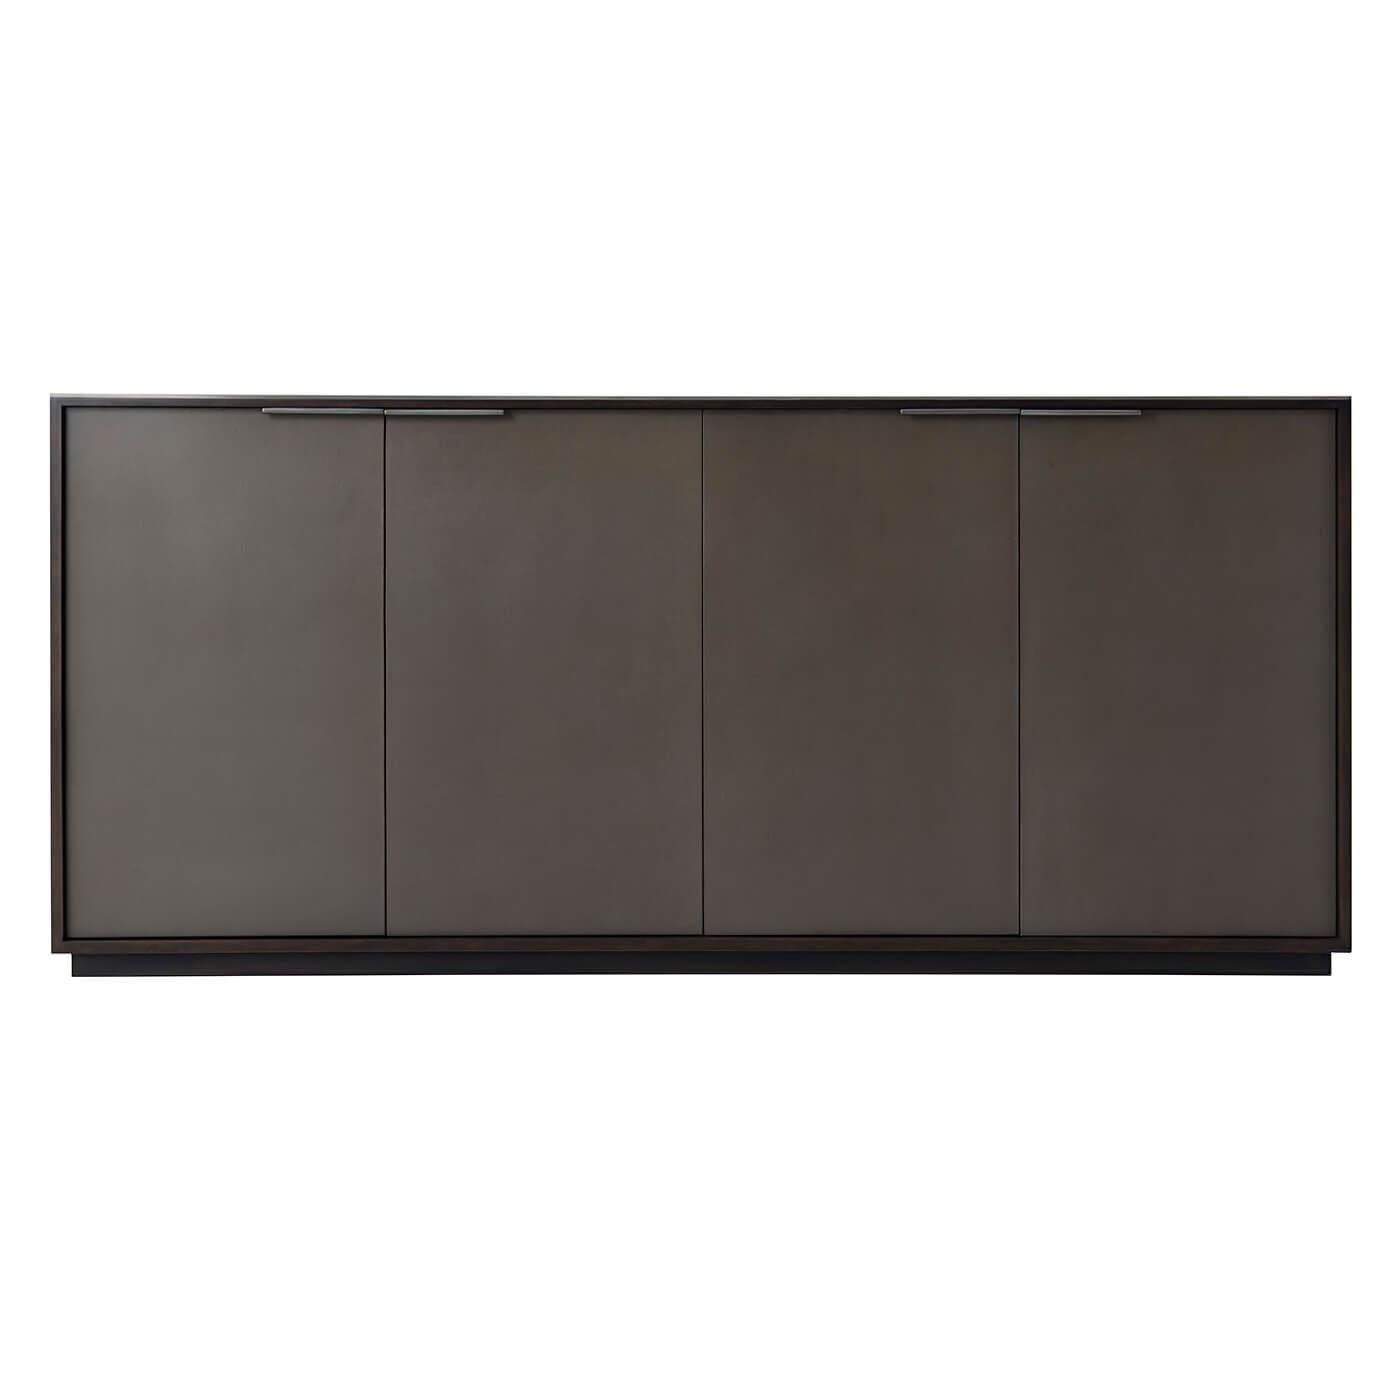 Mid-Century Modern style four-door buffet with an Ossian finish cherry case, four grey leather paneled doors enclosing two sections each with an adjustable shelf, and a gunmetal finish top molding and handles. 

Dimensions: 76